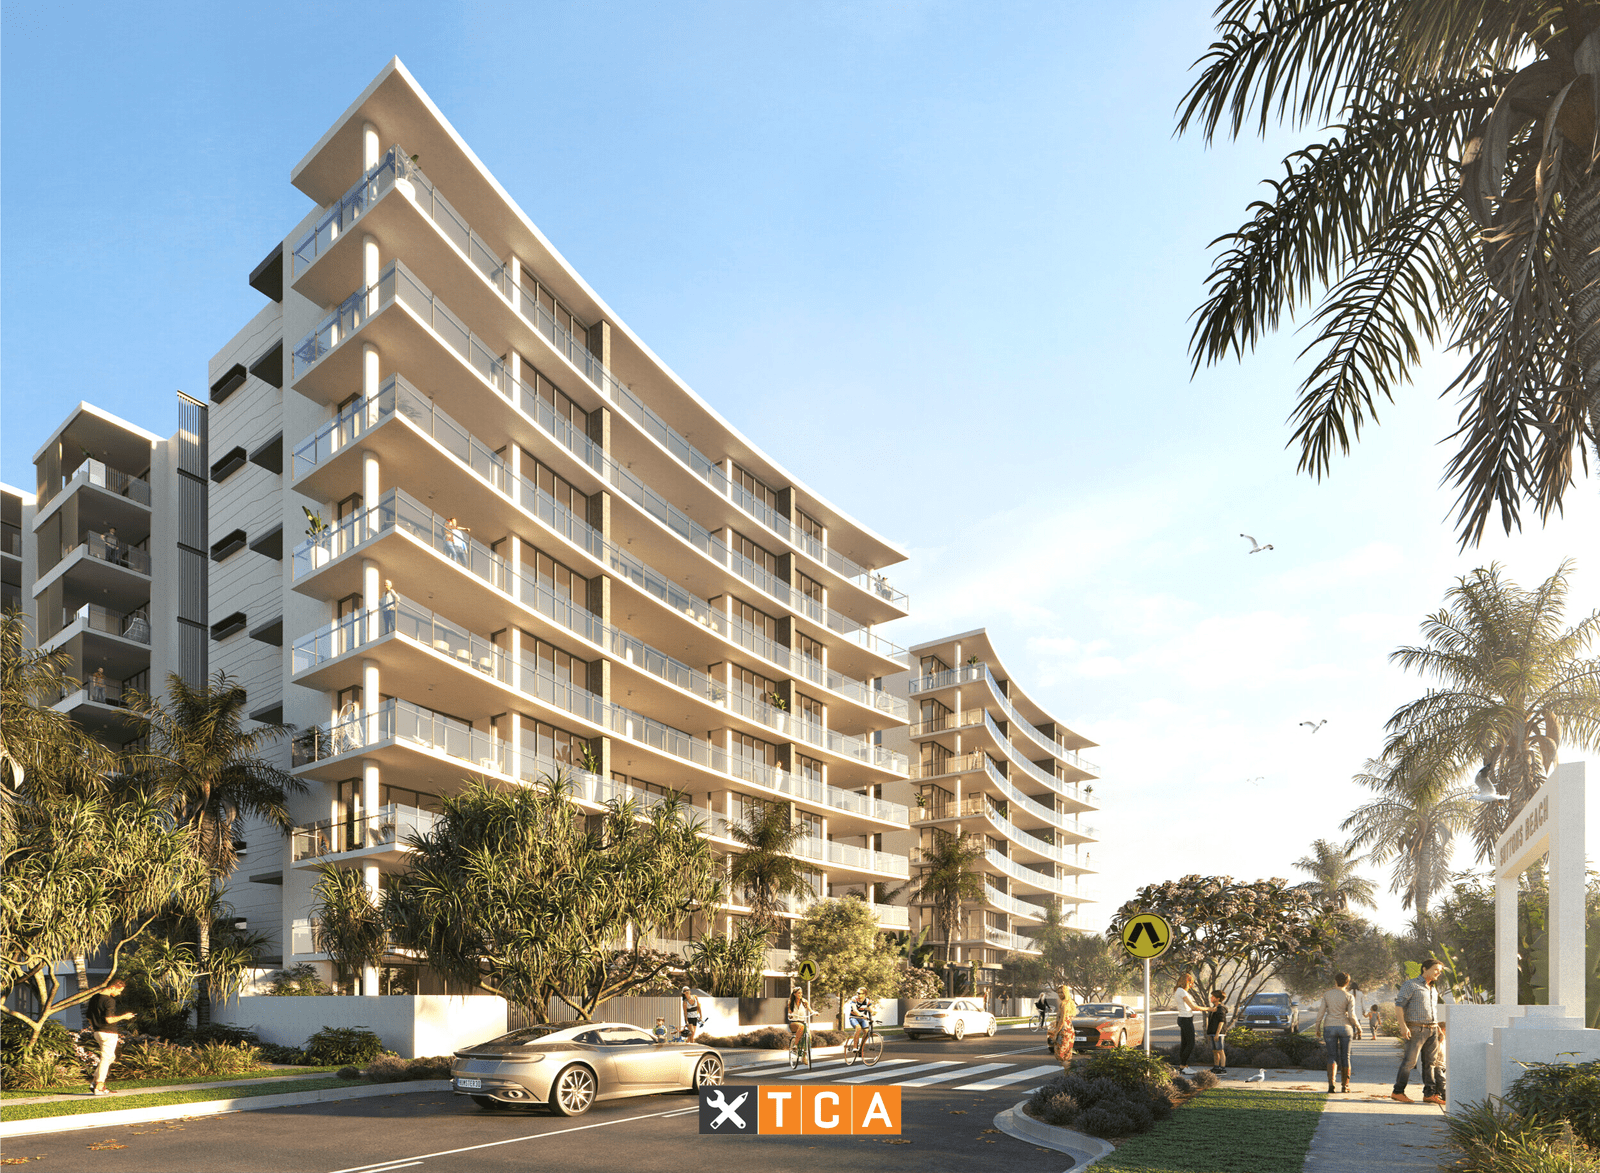 Redcliffe, Brisbane completed project